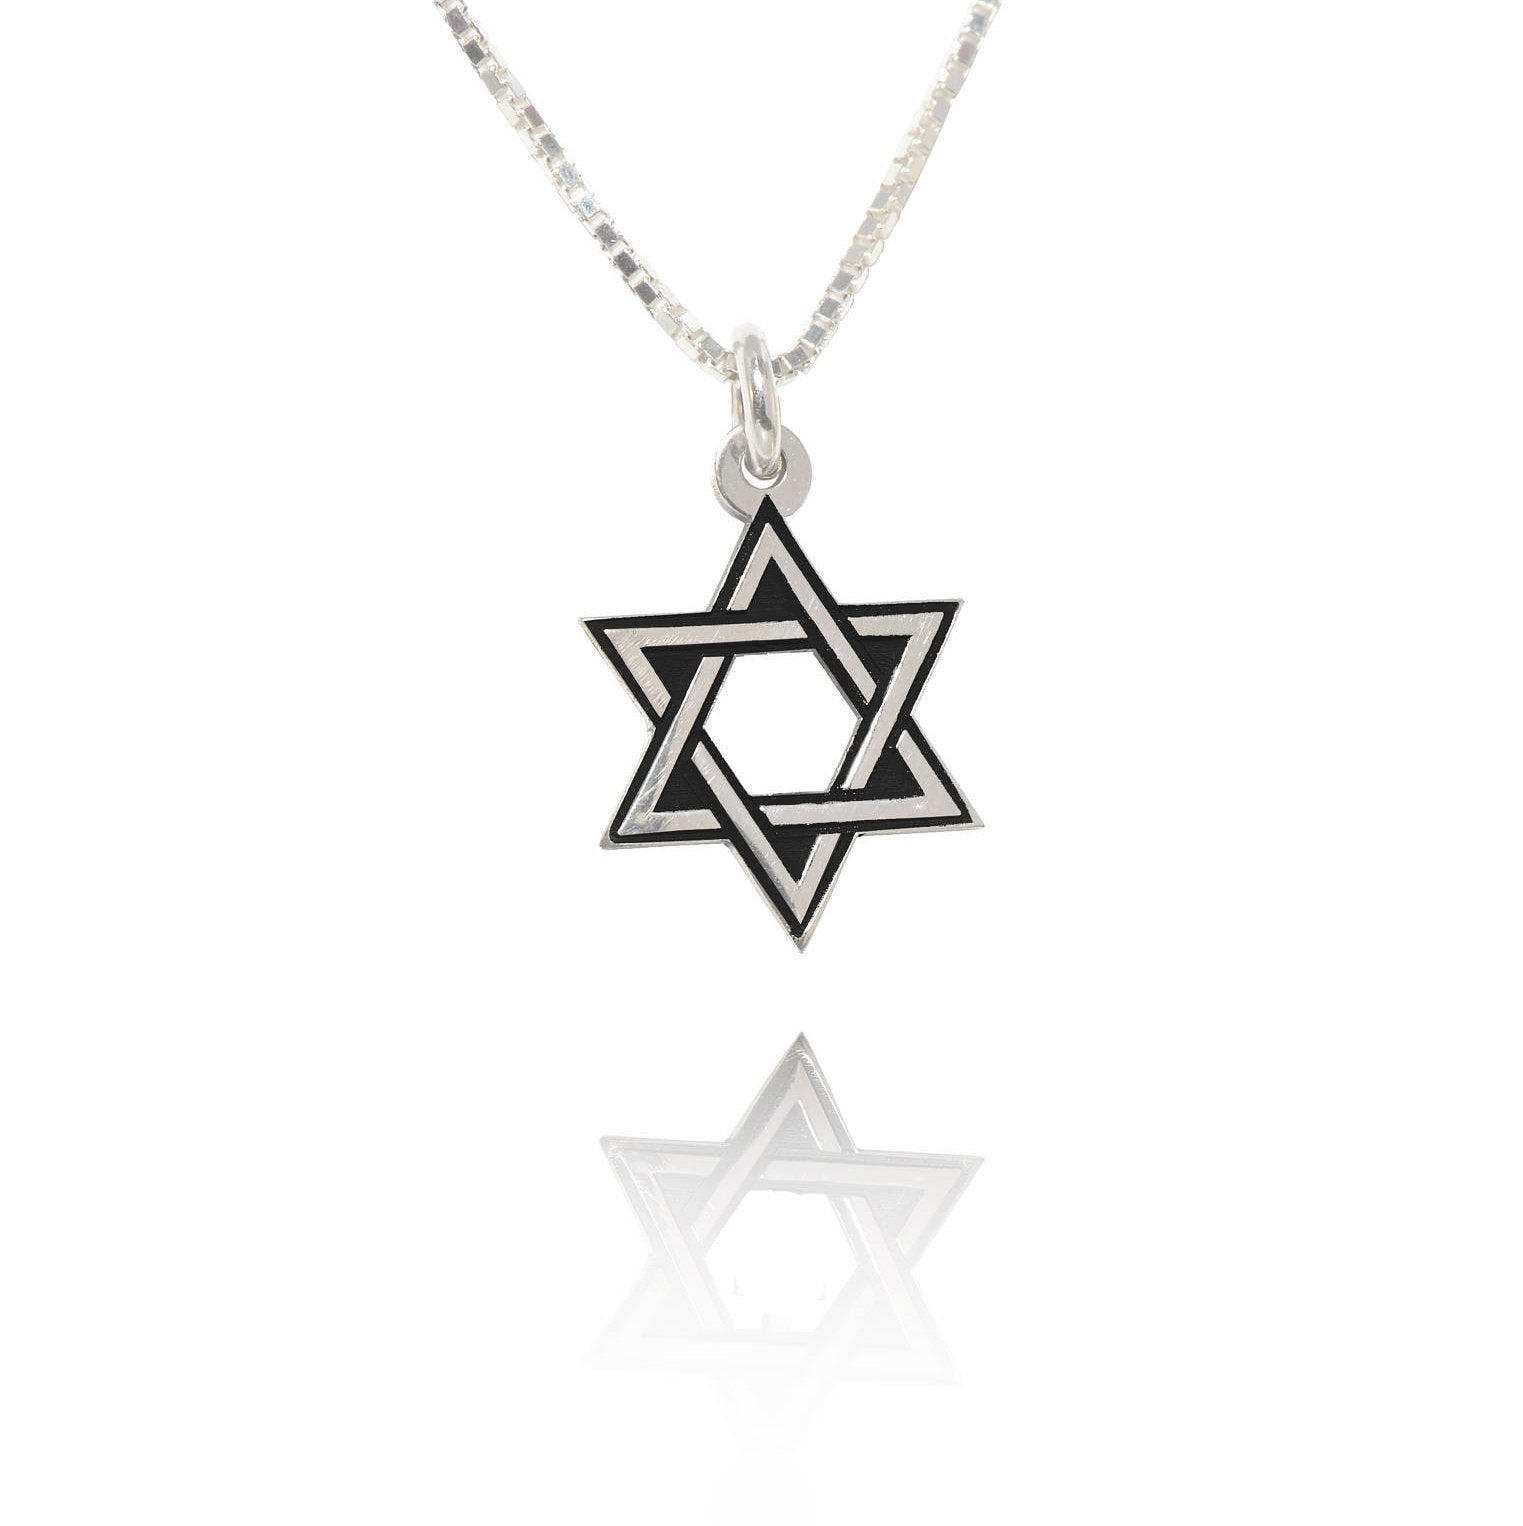 Magen David, Star of David Necklace, birthday gift, gift ideas for her, Personalized Gift, gift for women, Christmas gift